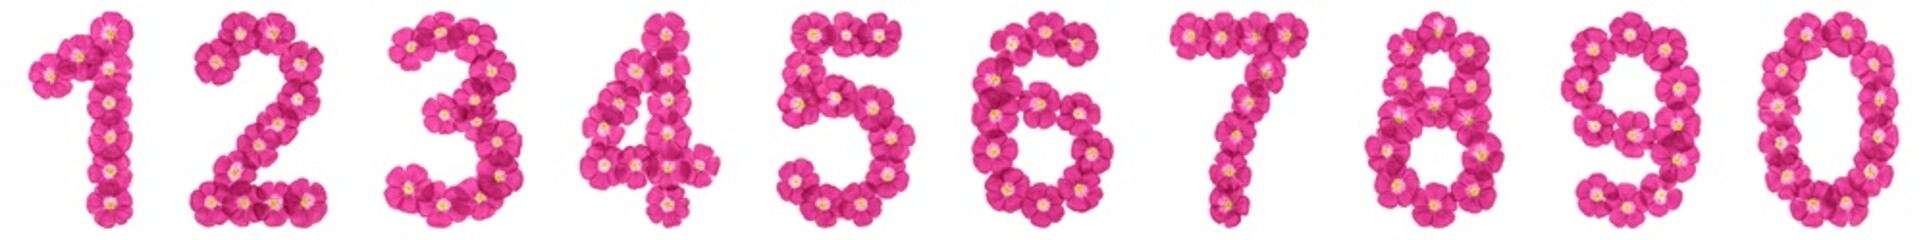 Set of arabic numbers, natural pinke flowers of flax, isolated on white background